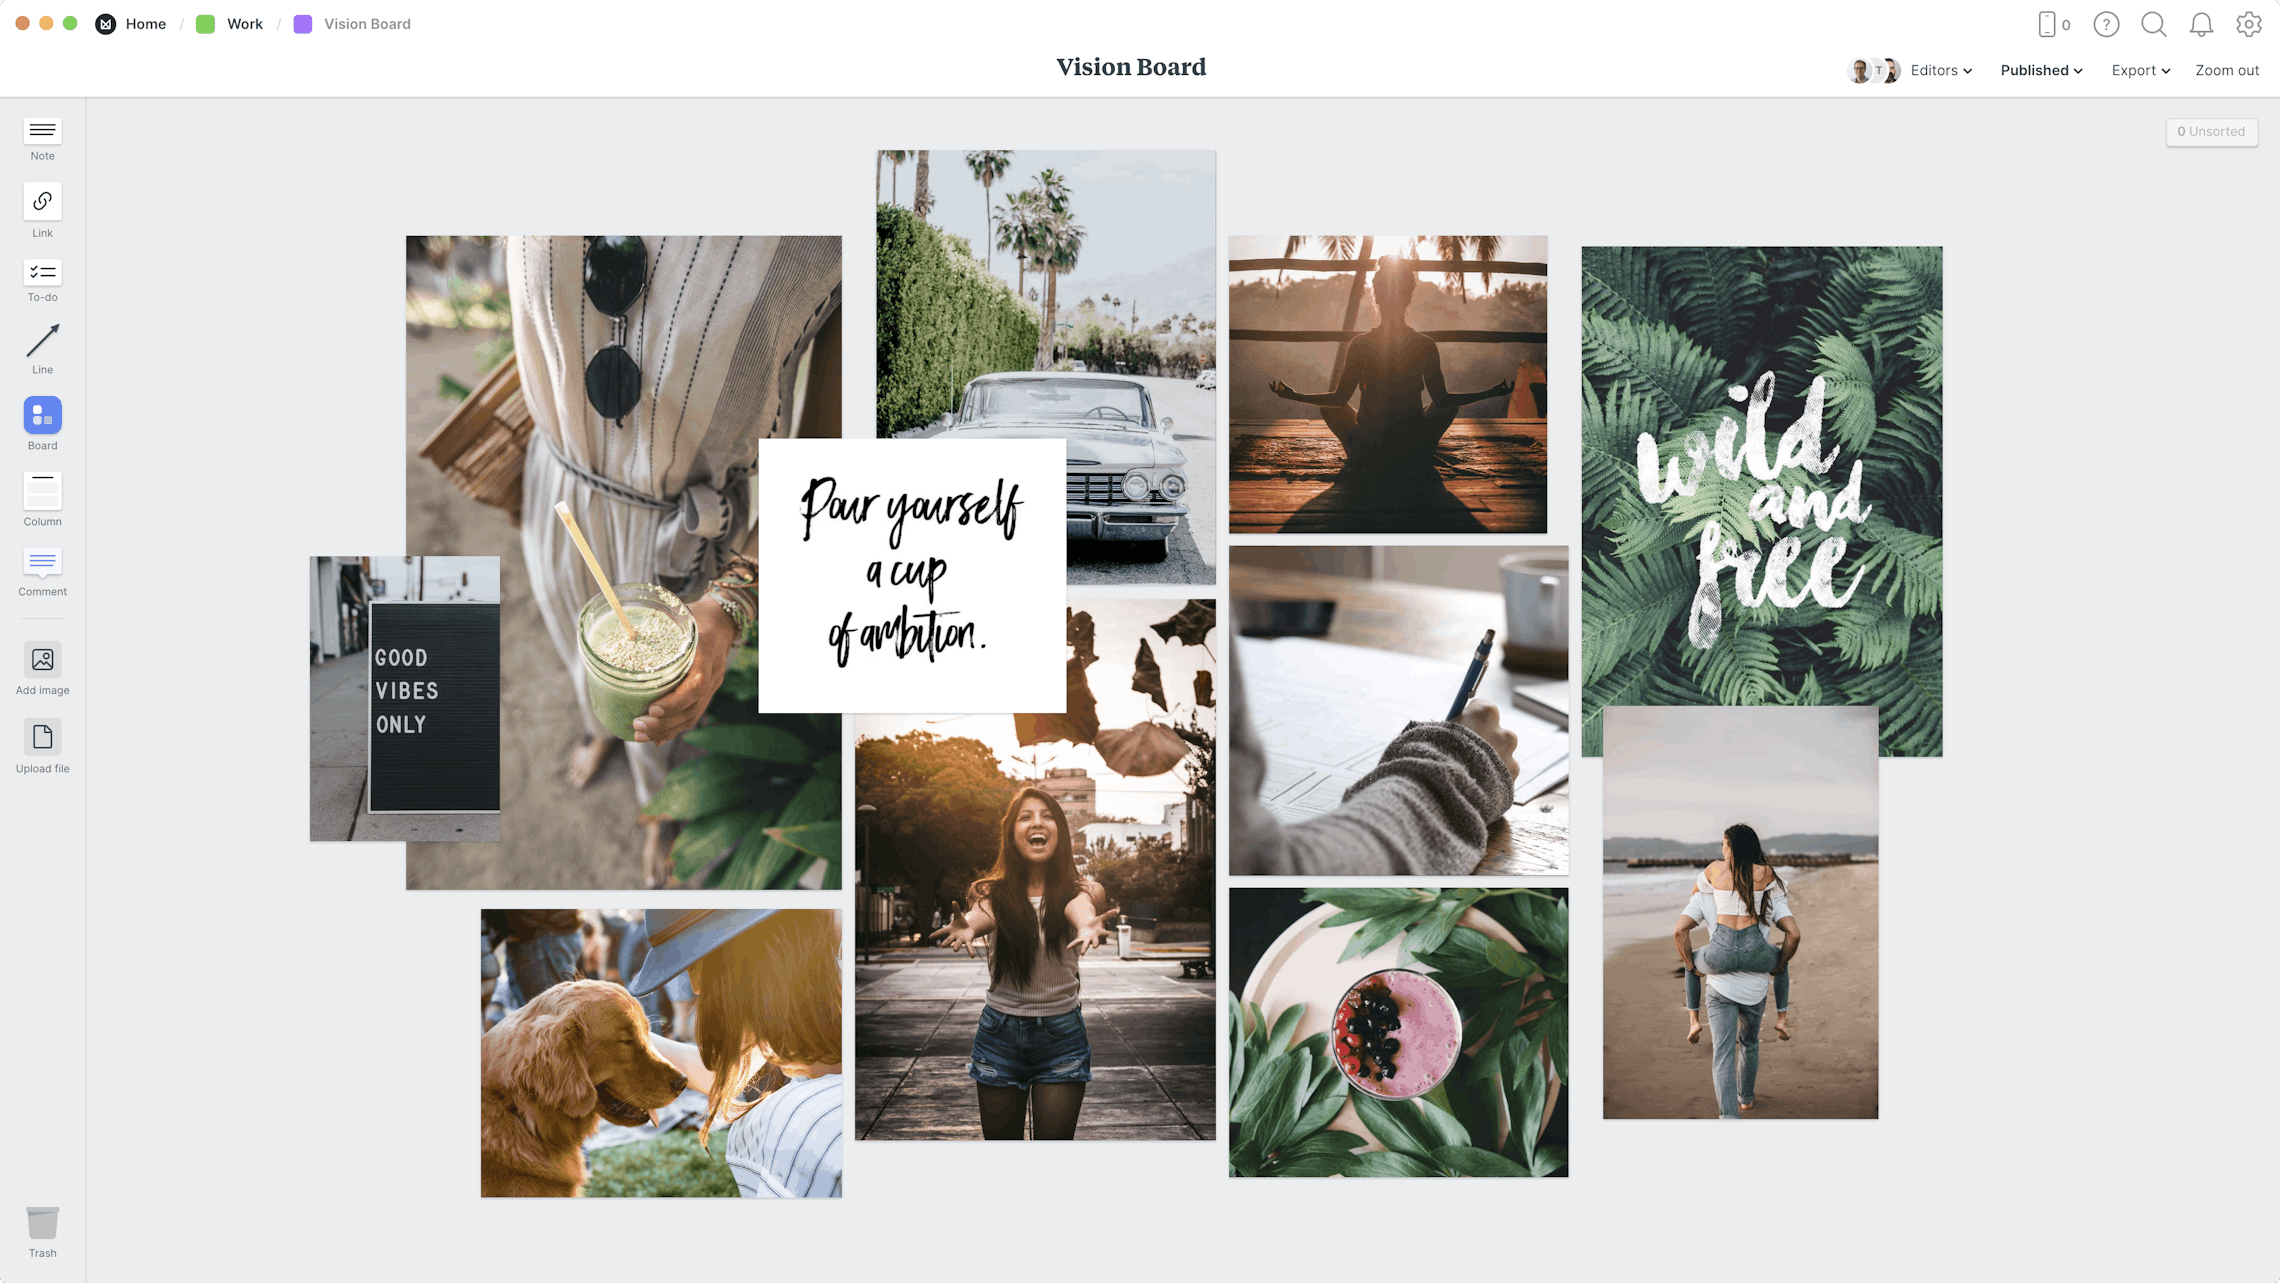 Vision Board examples for adults, within the Milanote app